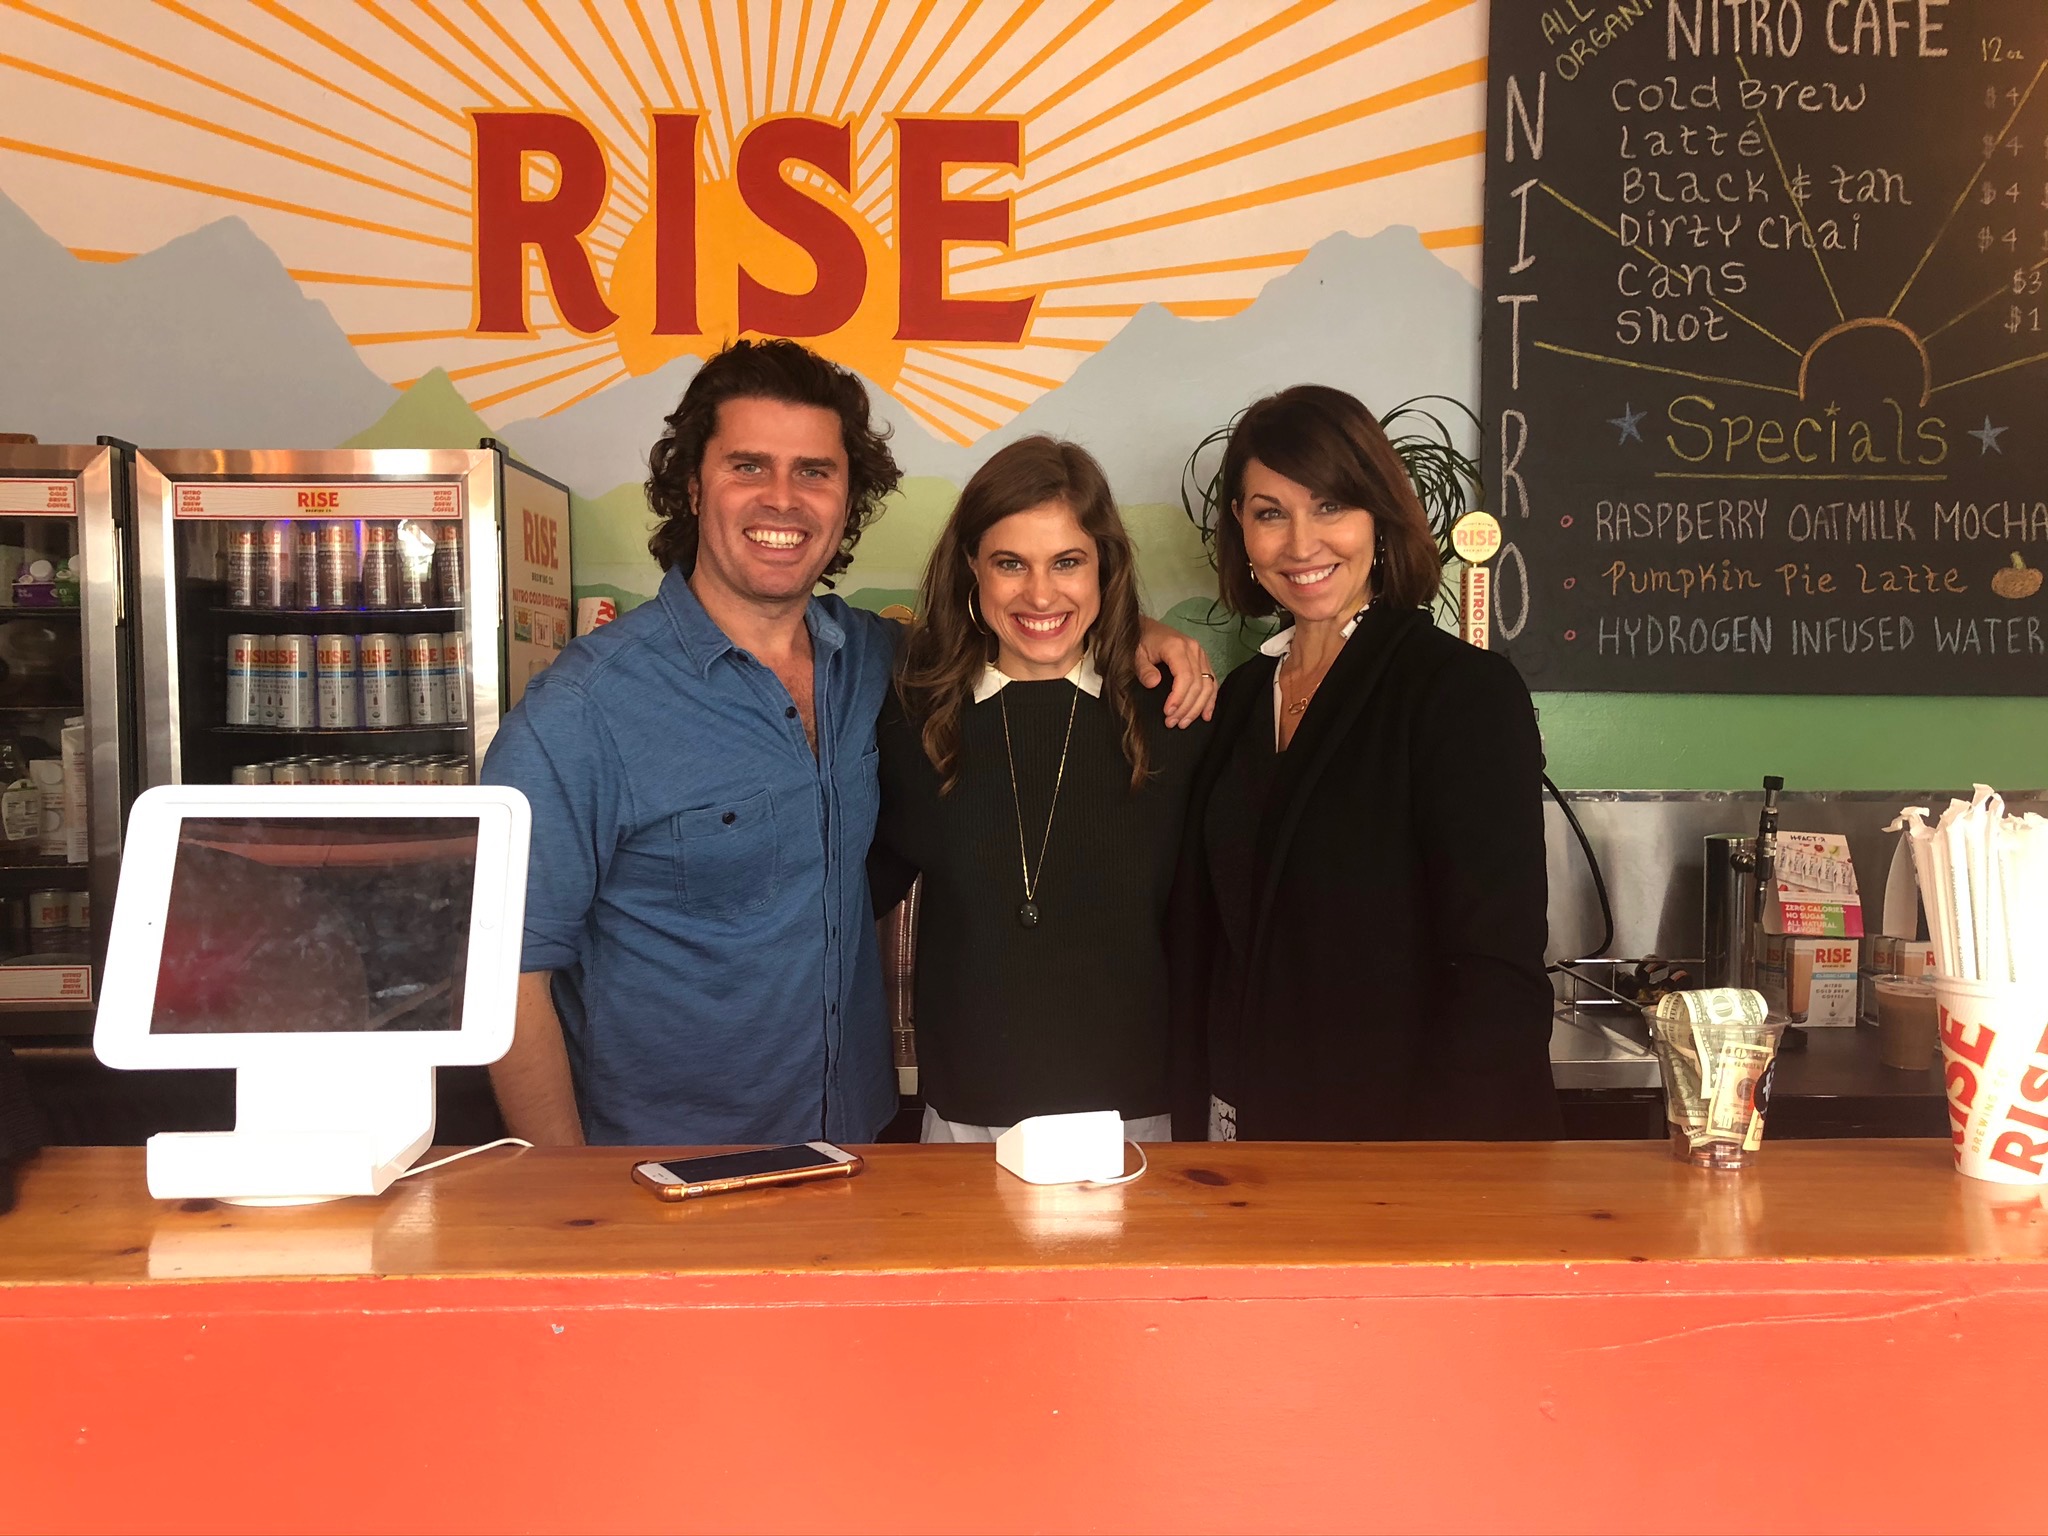 Three people at the RISE cafe in Lower East Side Manhattan: a man with a denim button down shirt, a woman with a dark green sweater and a woman with a black blazer on: all with brown hair